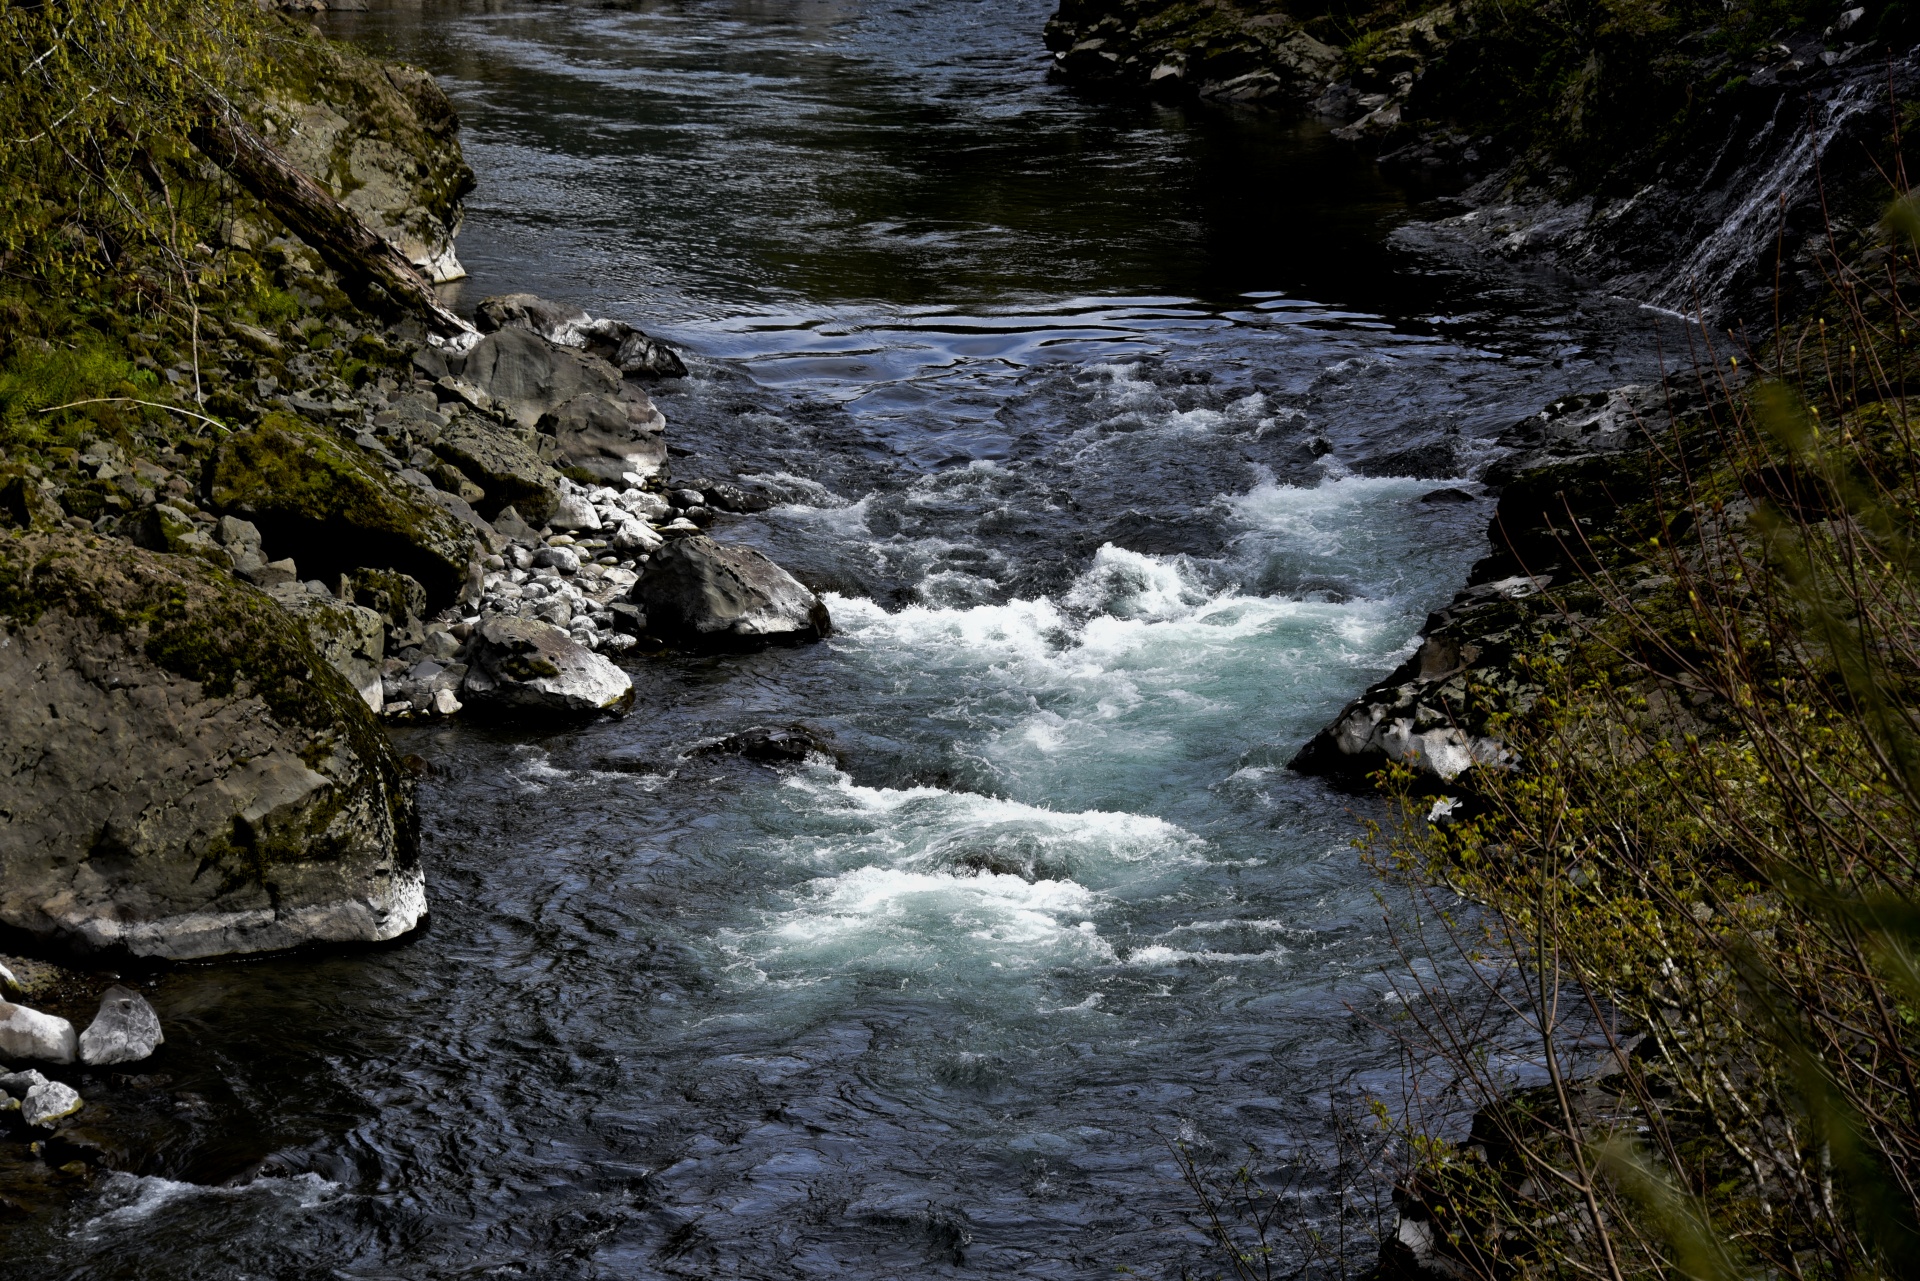 River flowing in Oregon showing turquoise rapids